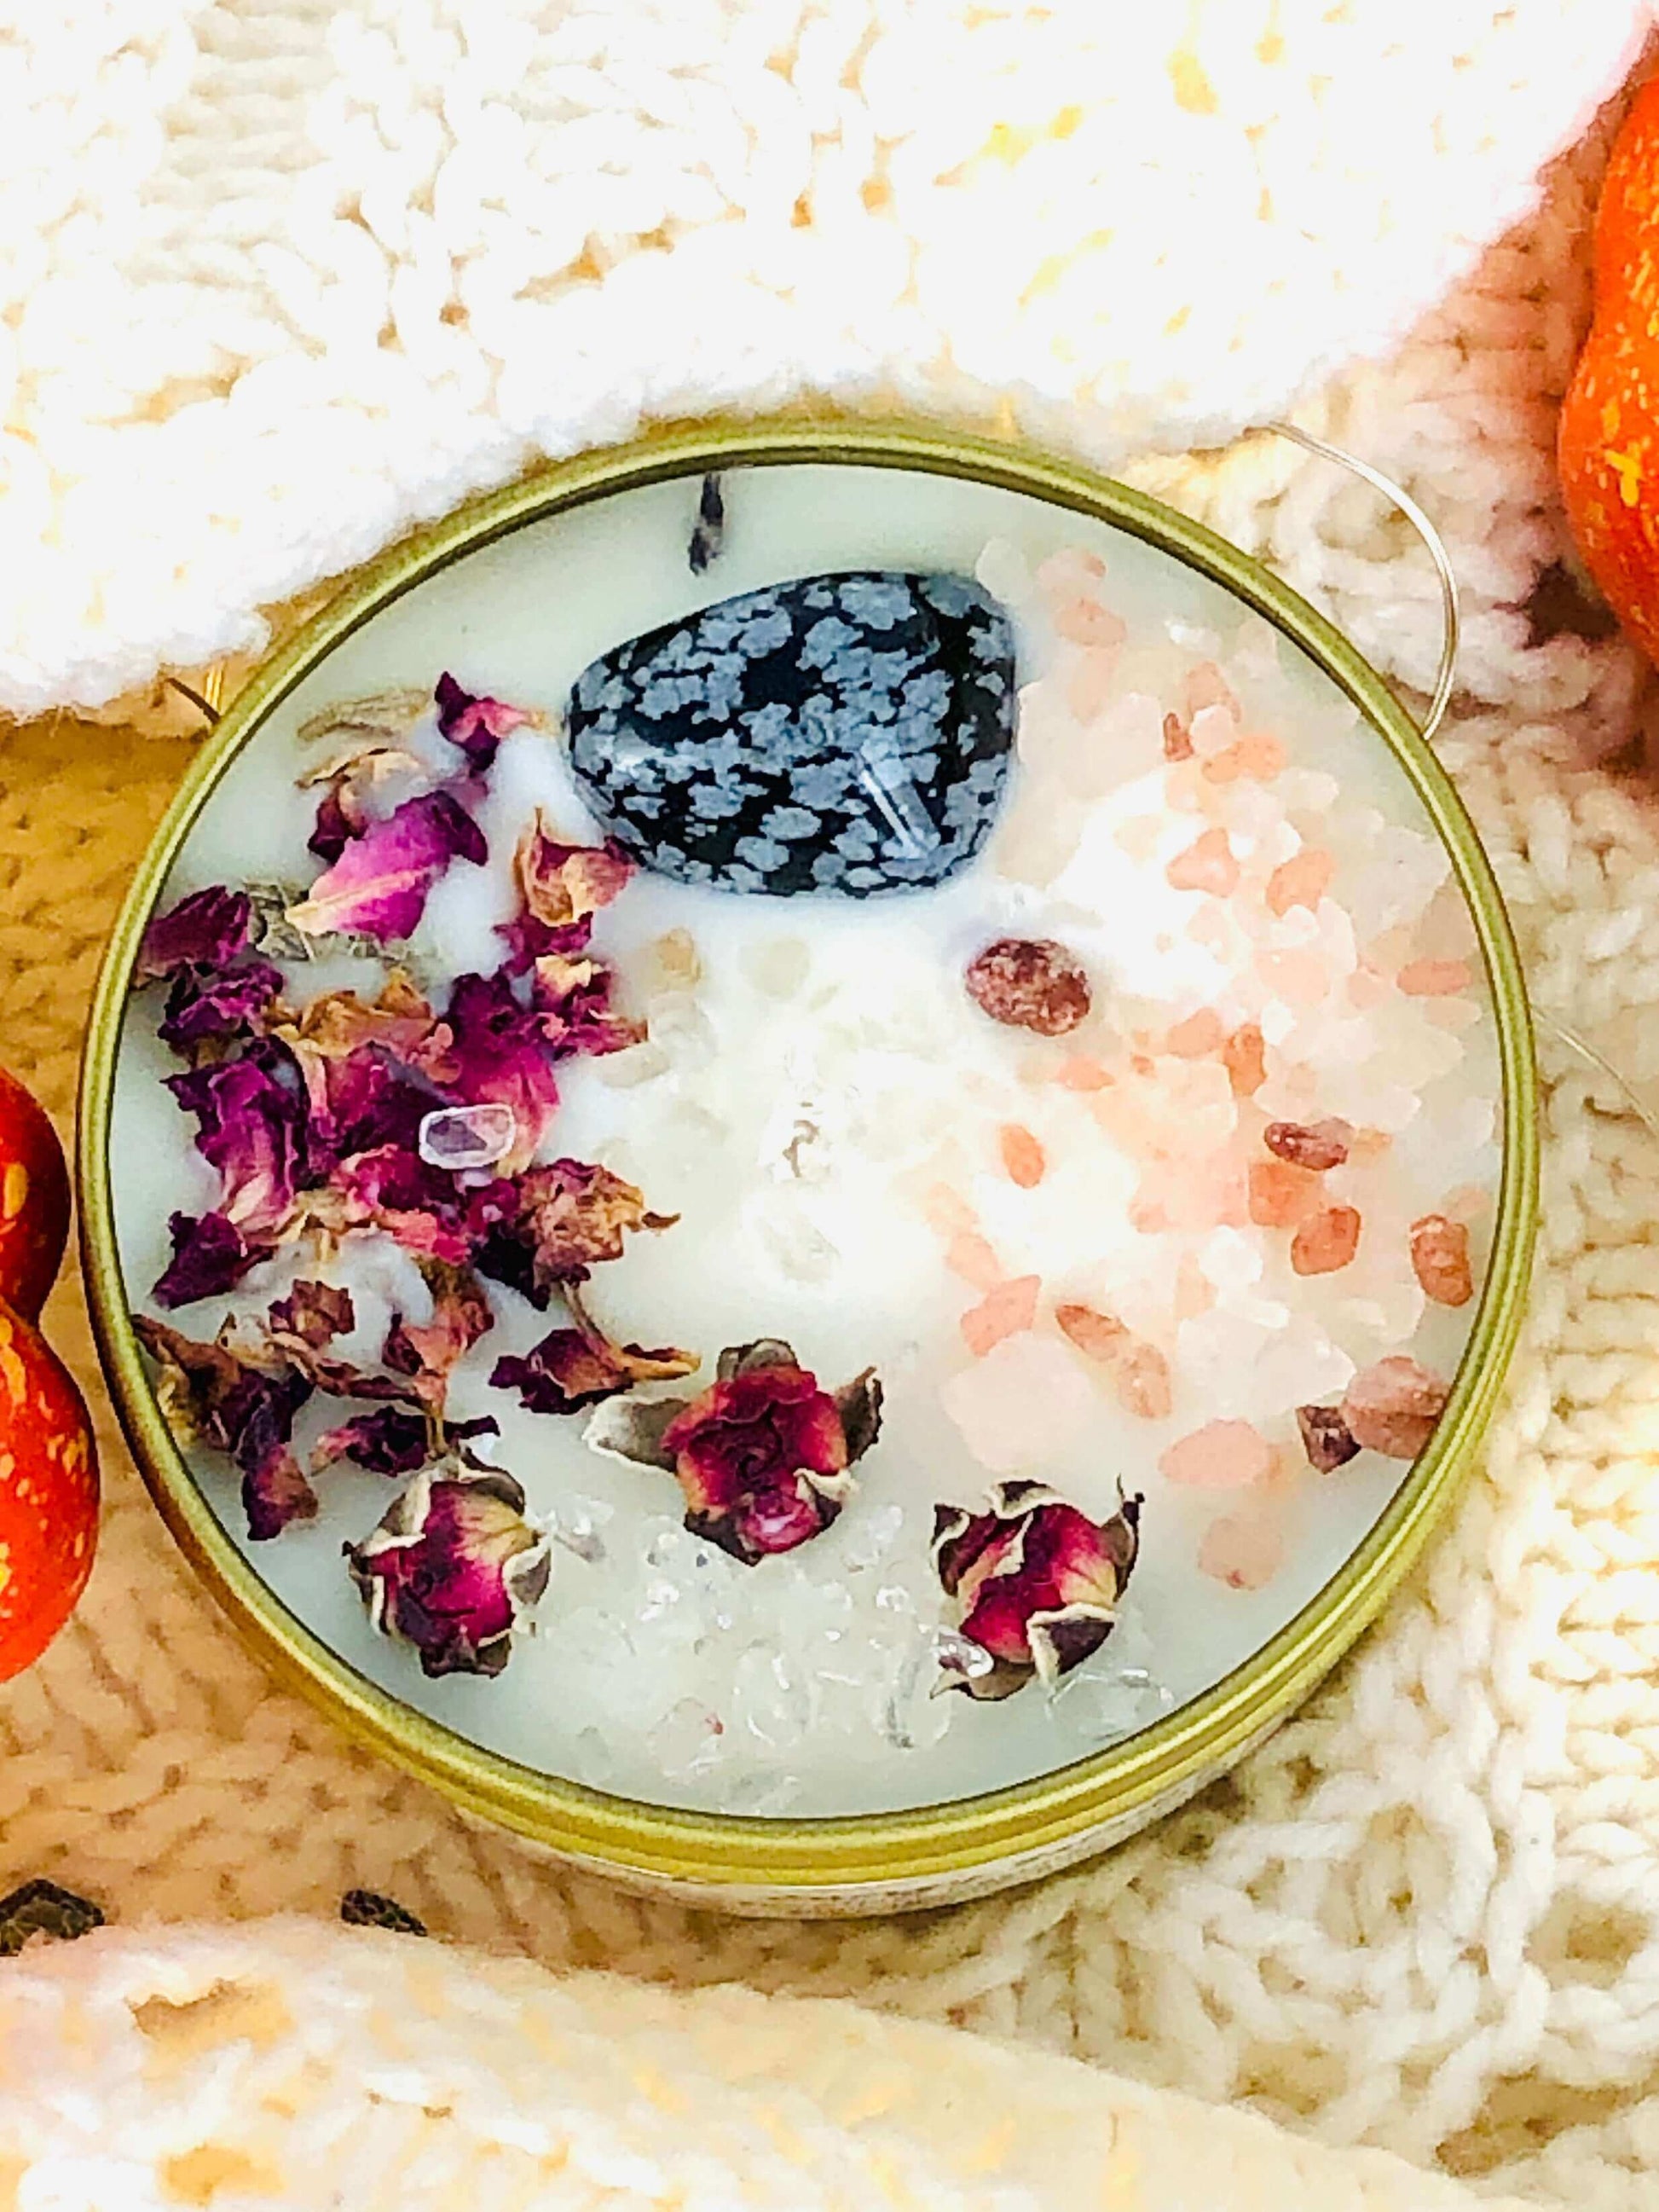 NEW - Fall crystal healing candle , ENERGY BALANCE soy candle with crystals and herbs , Intention candle , coffee lovers candle gift , meditation